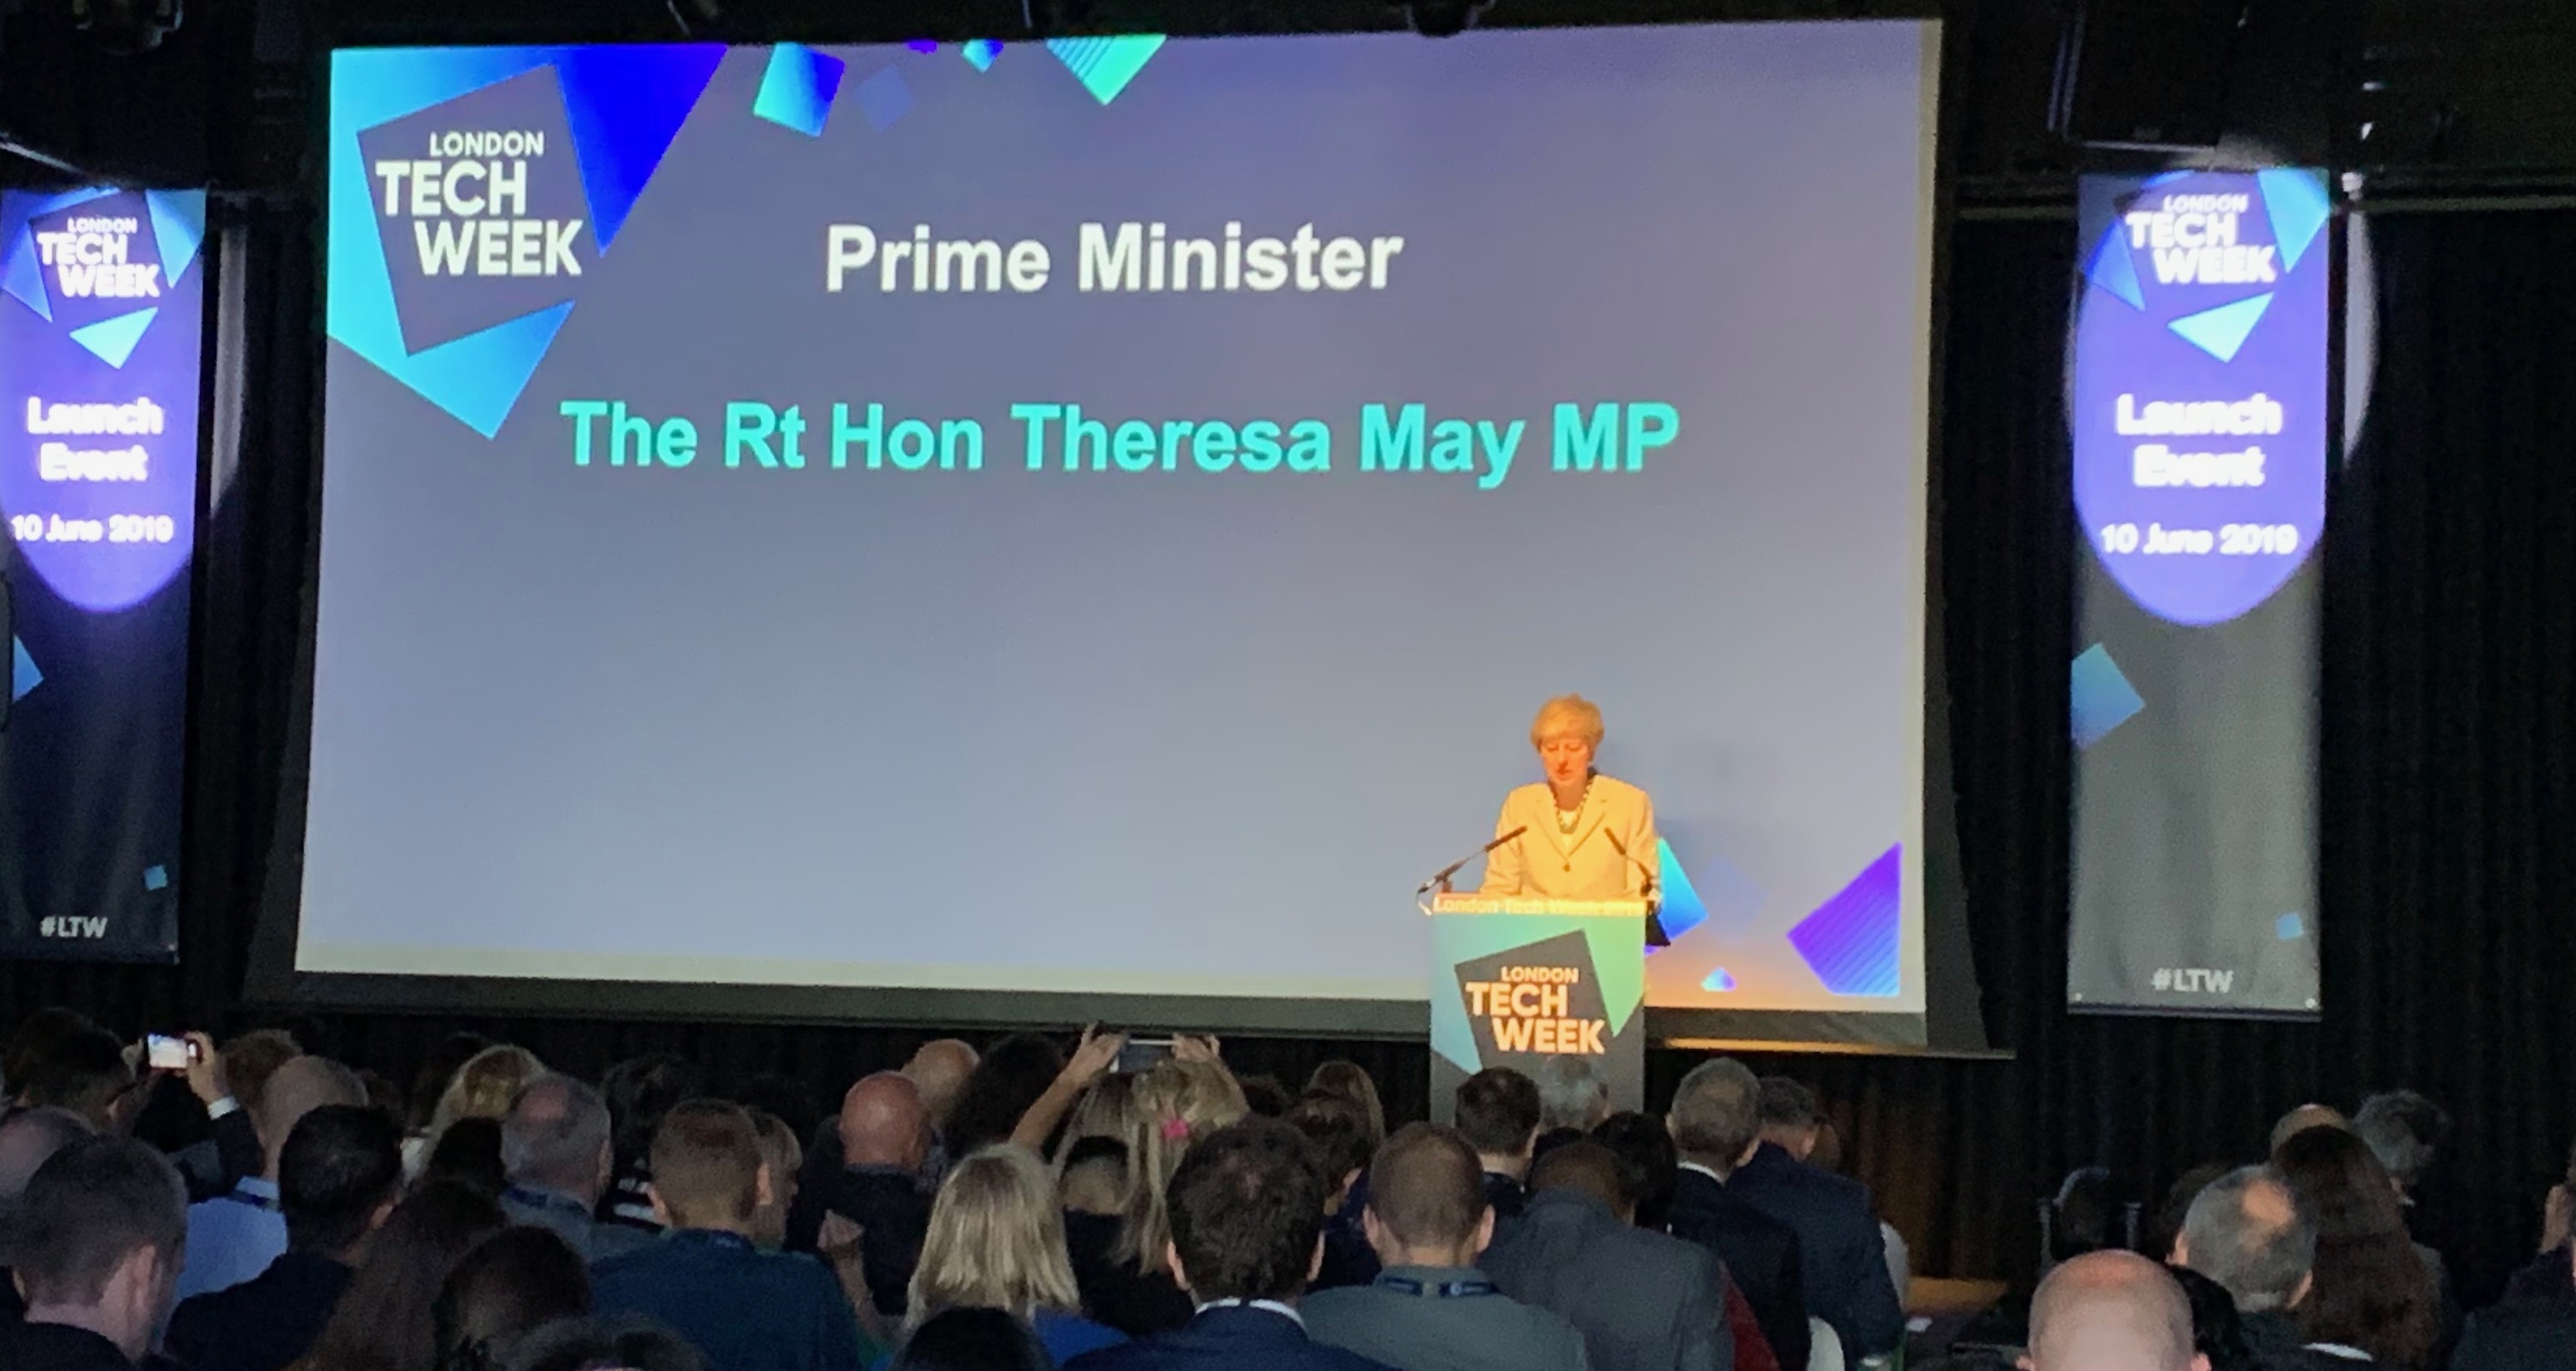 Prime Minister Theresa May addresses London Tech Week